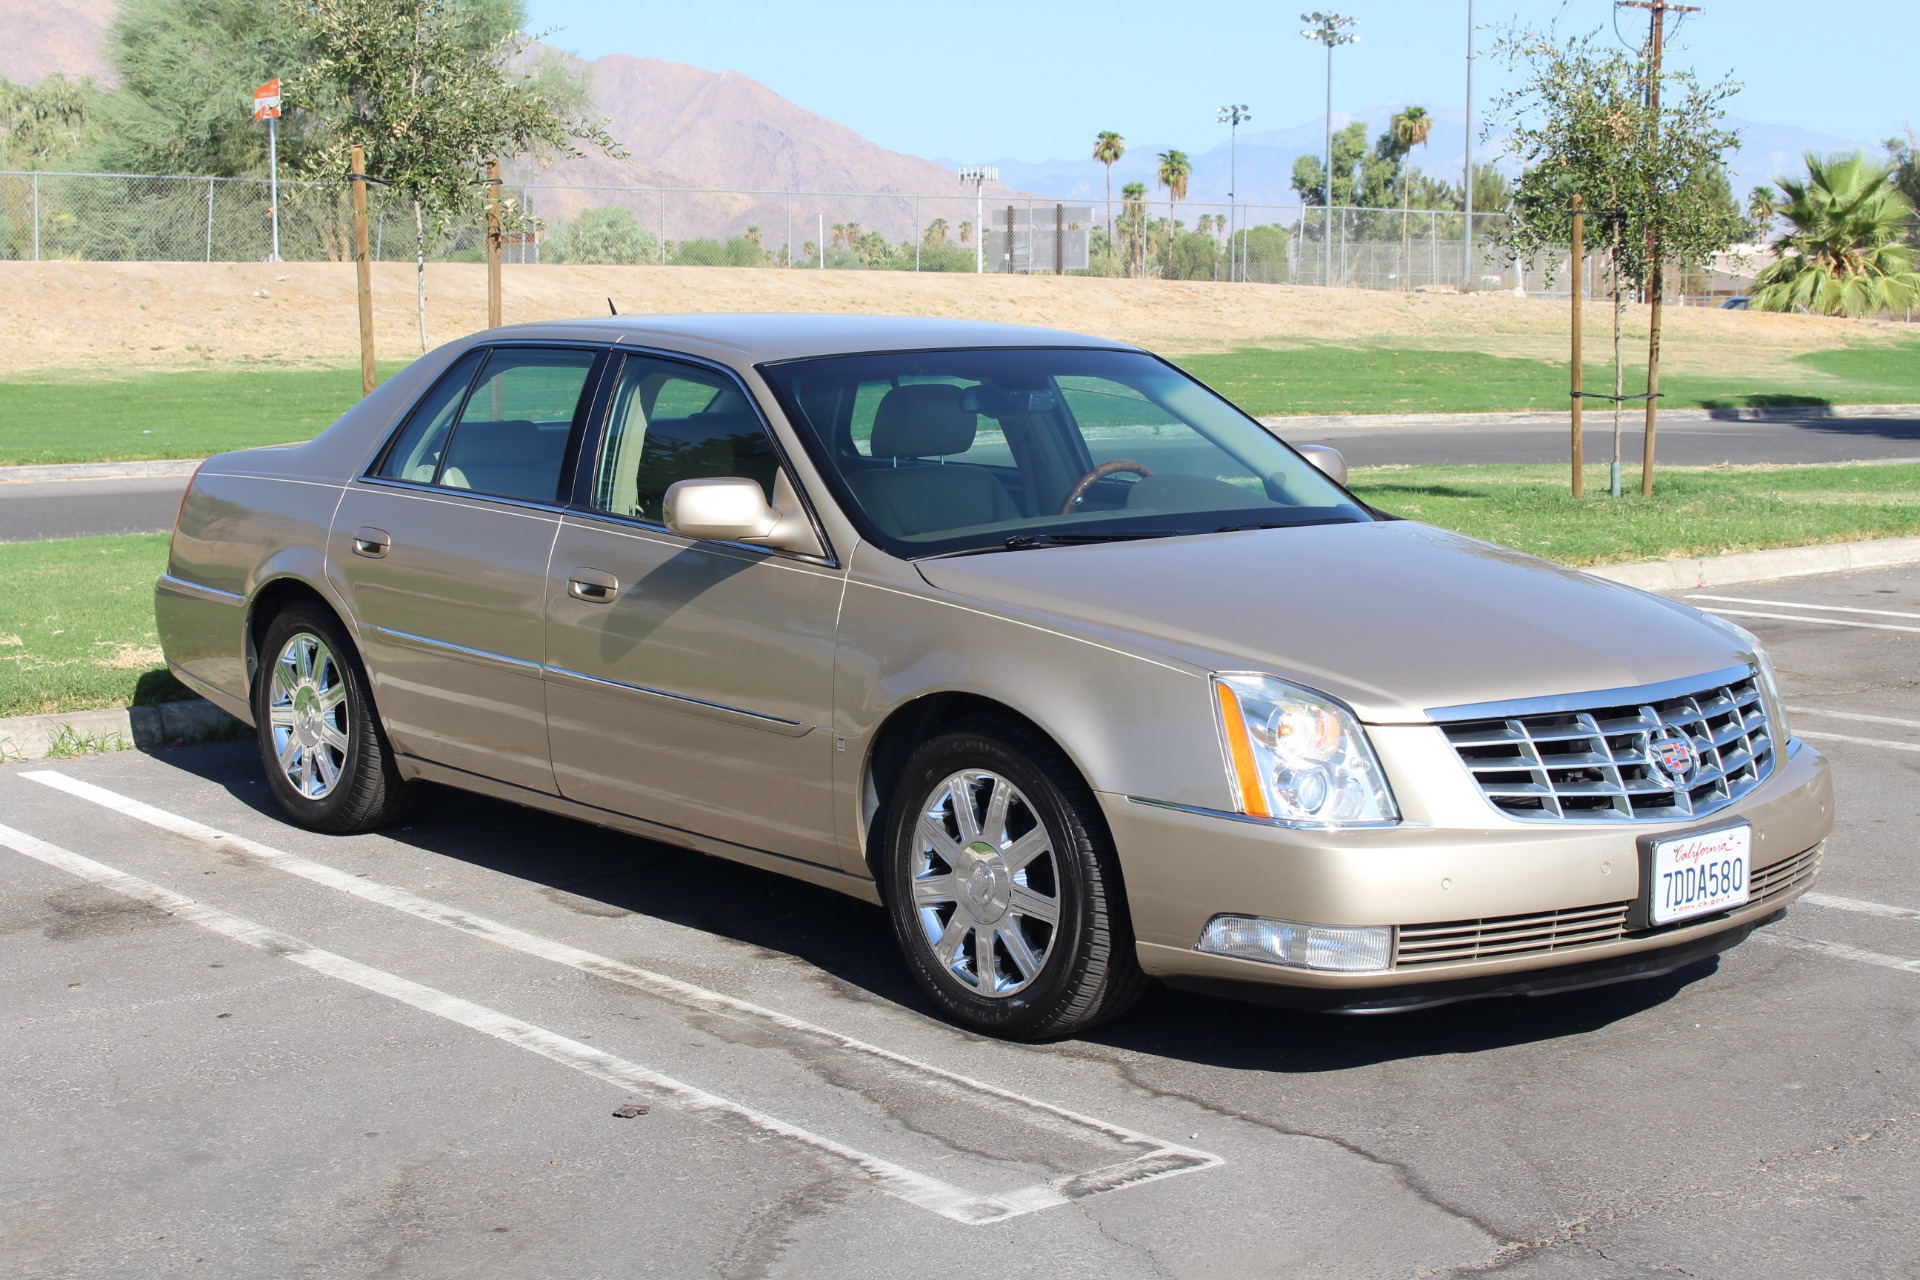 2006 Cadillac DTS Luxury I Stock # CA437 for sale near Palm Springs, CA ...